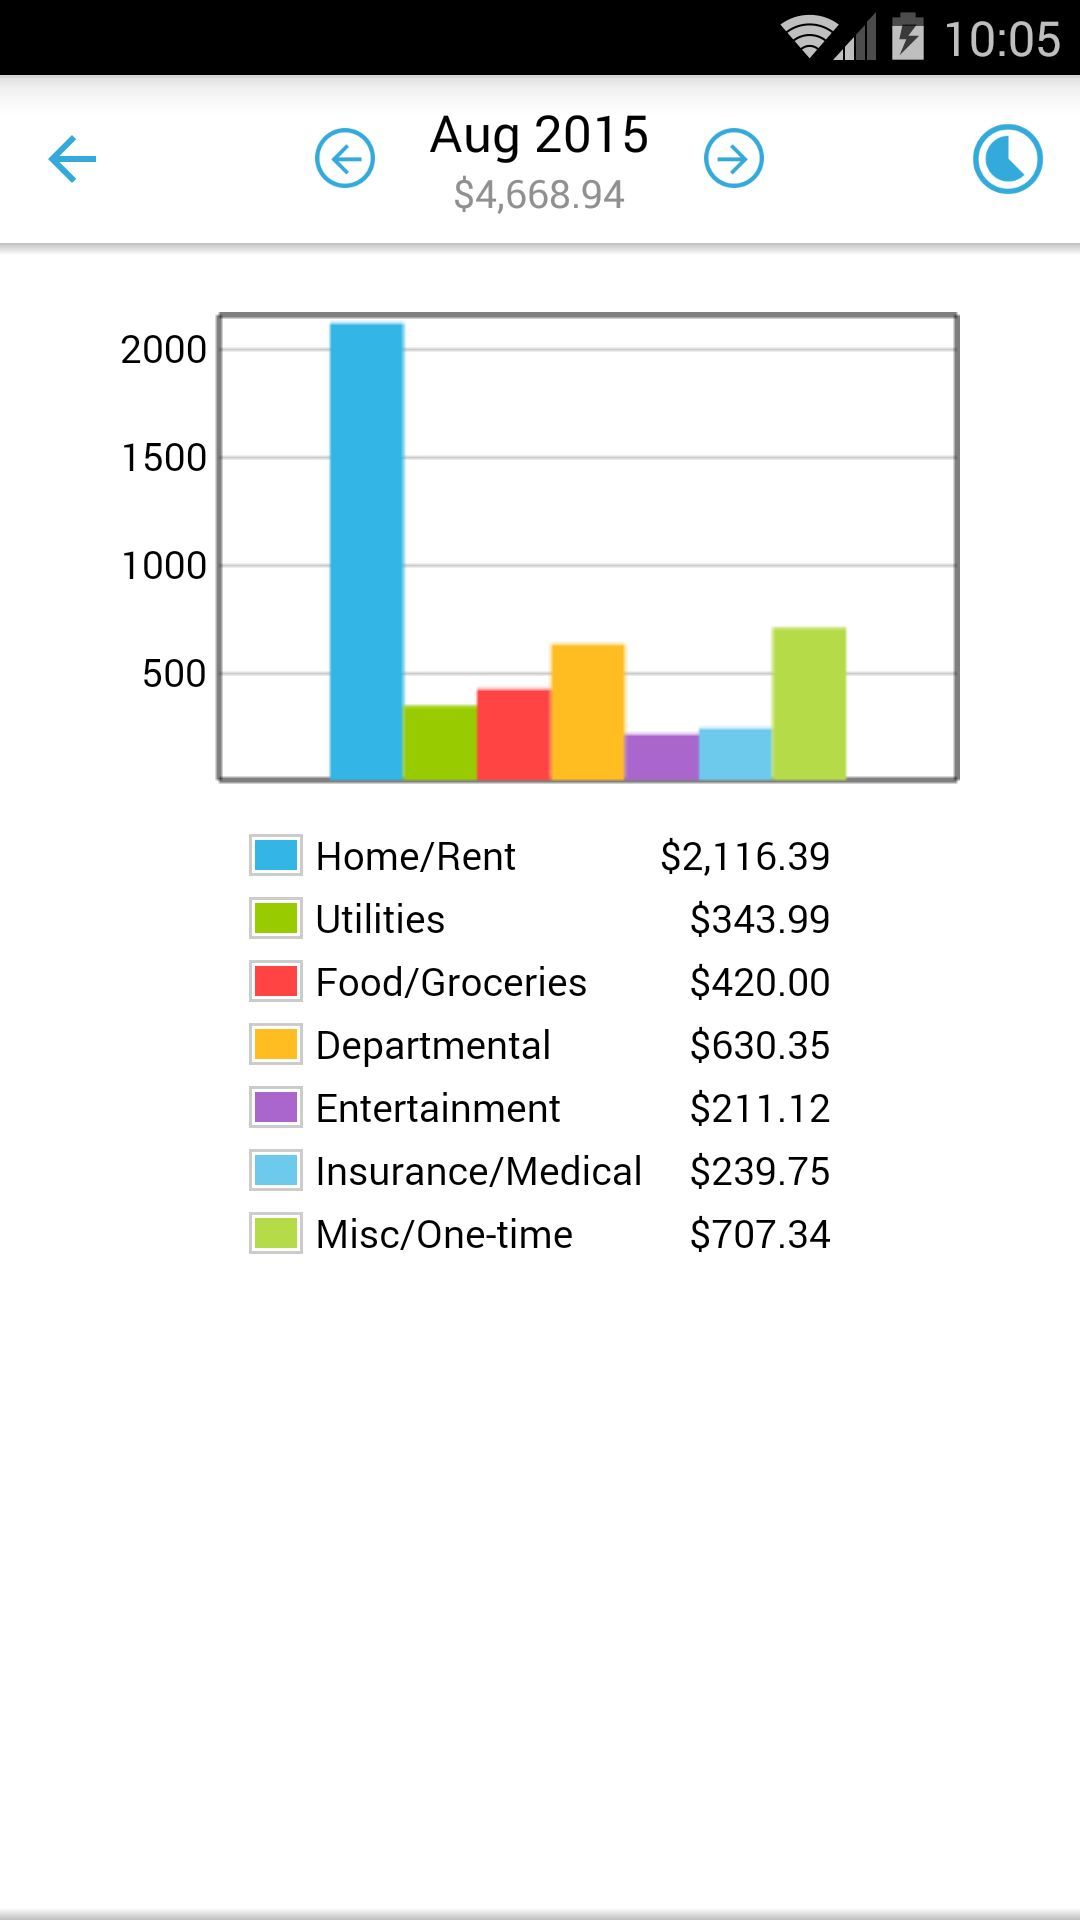 Home Budget with Sync